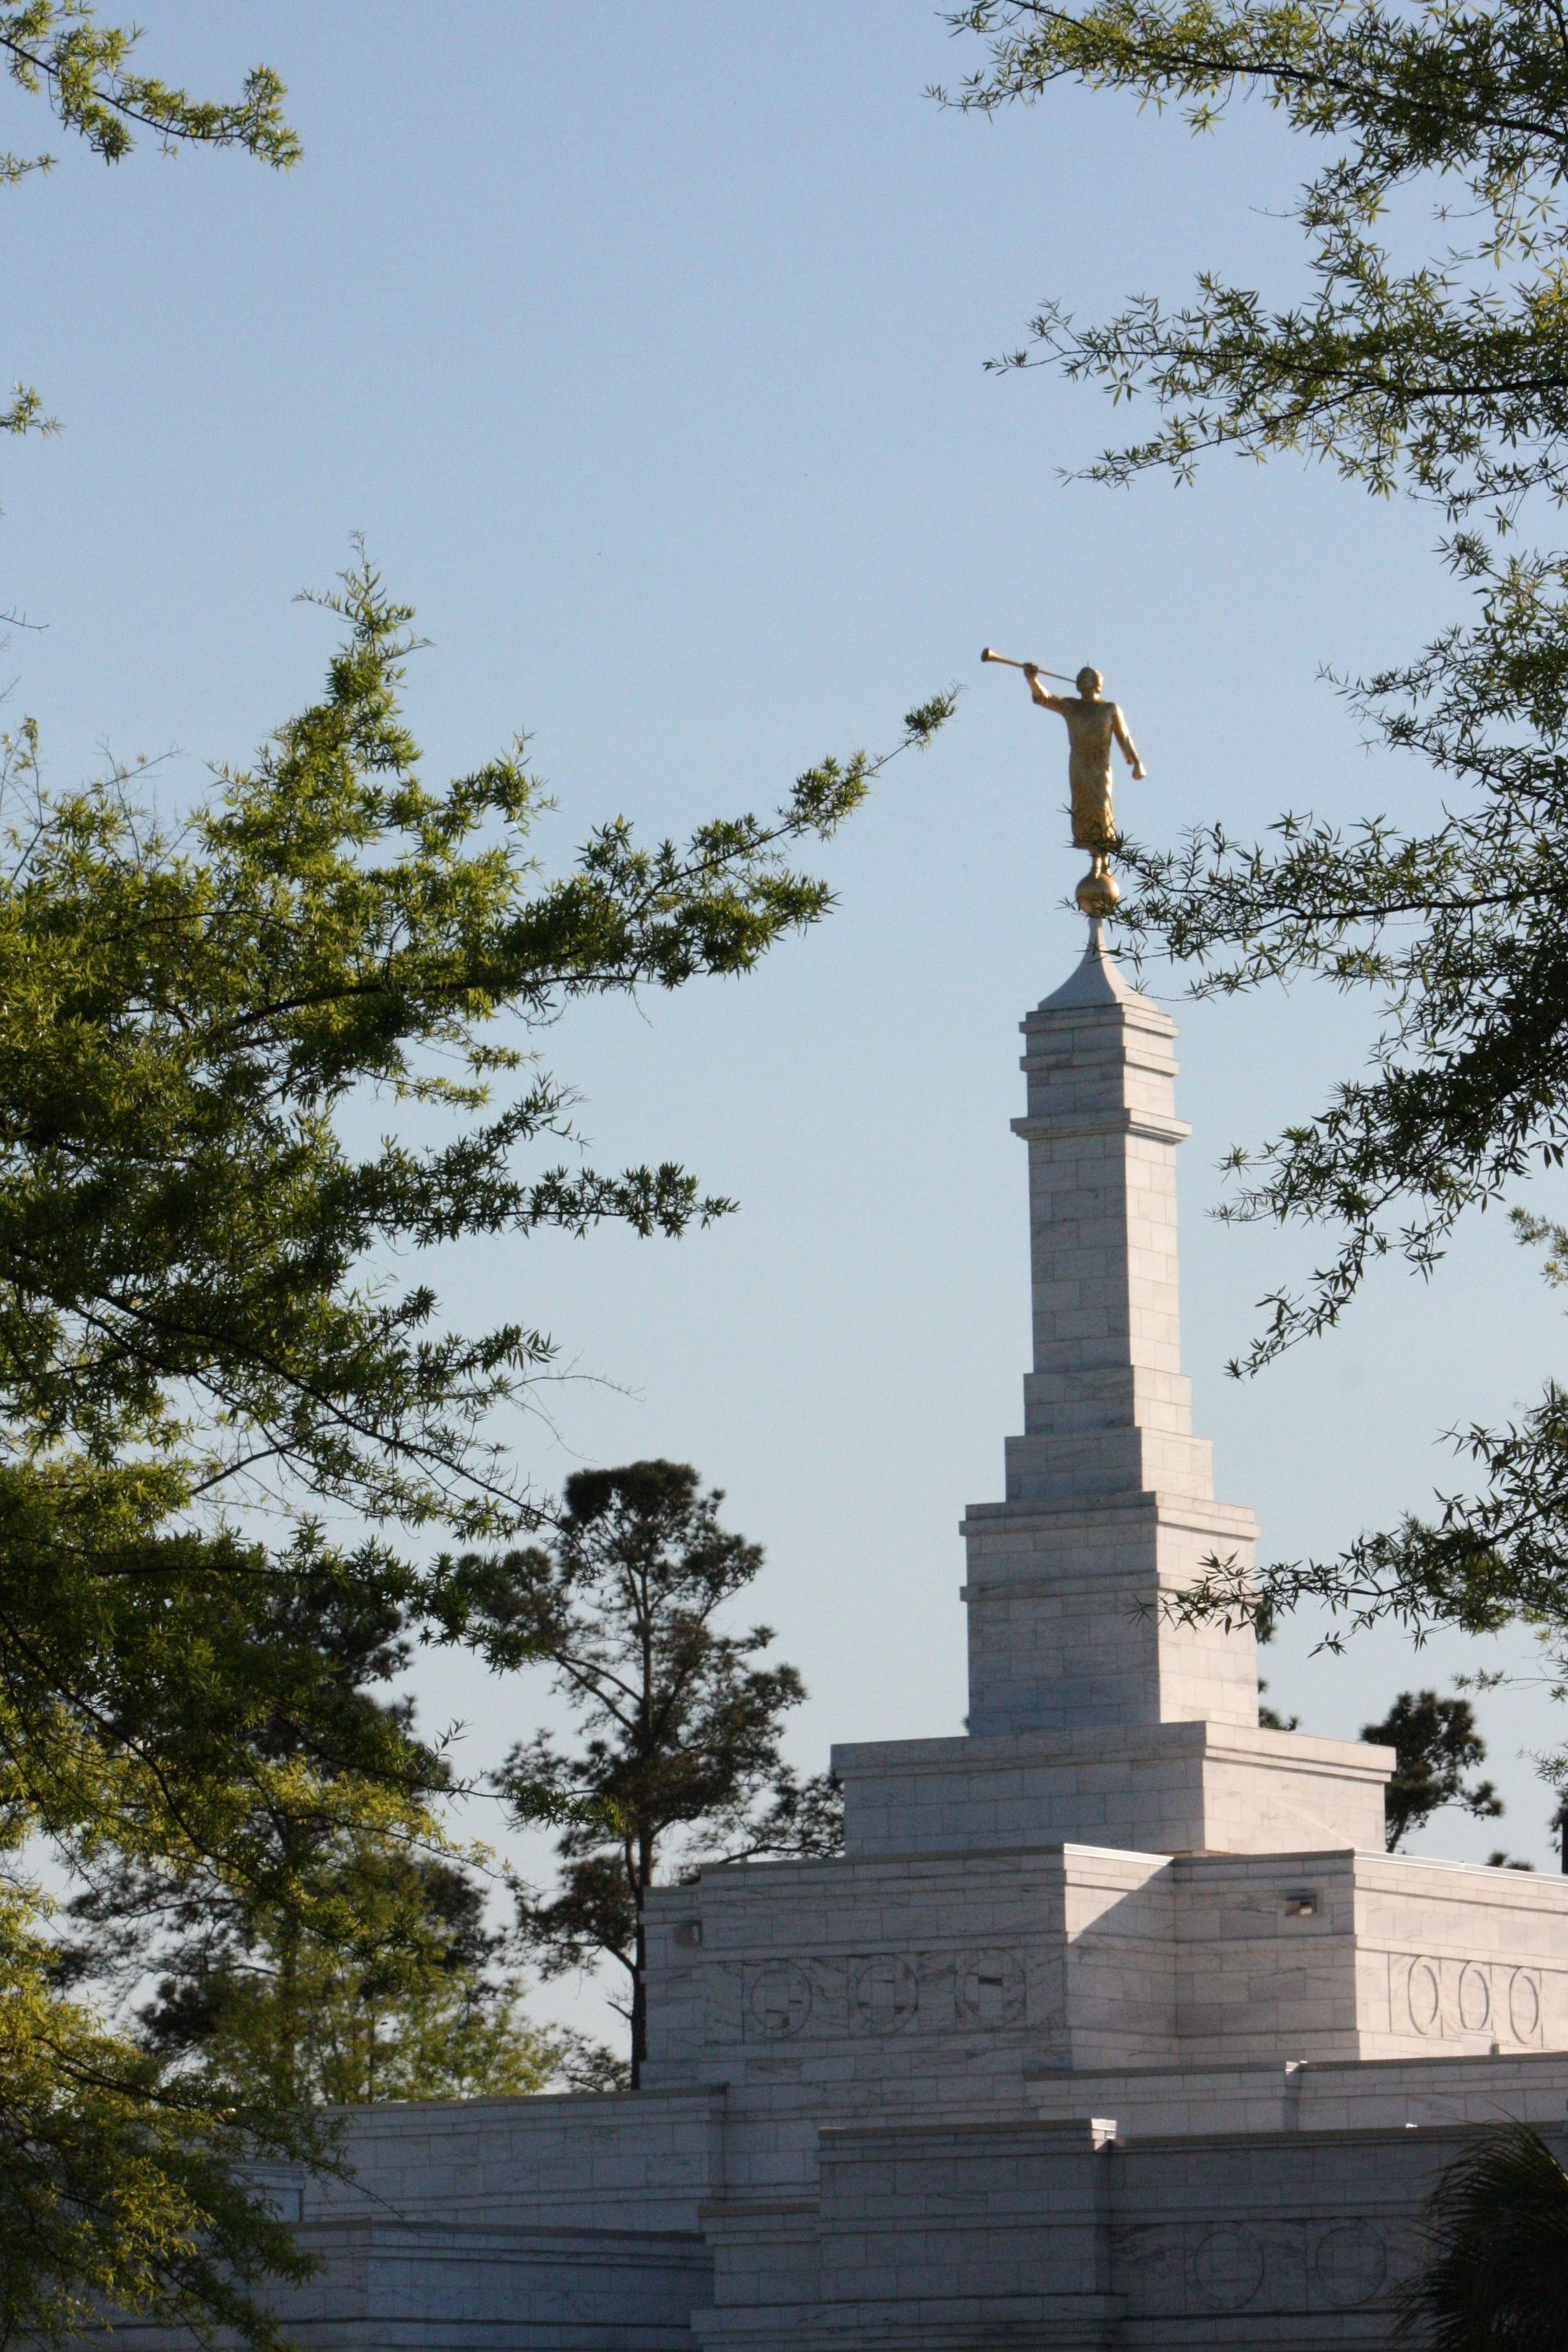 The spire and the angel Moroni on top of the Columbia South Carolina Temple.